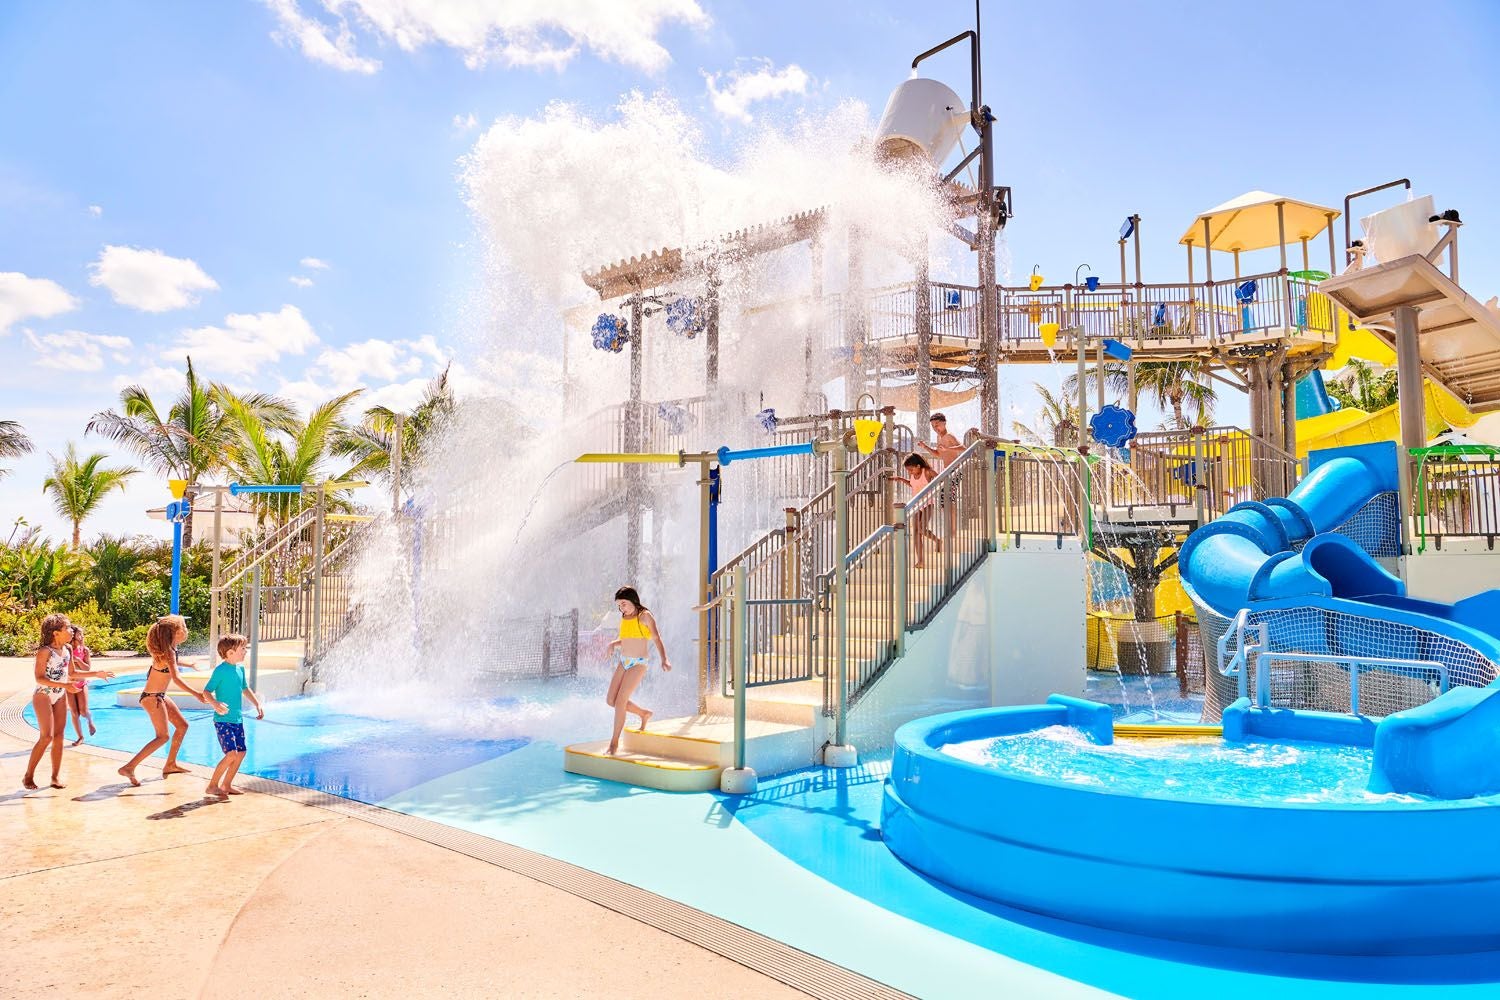 Children playing in water park